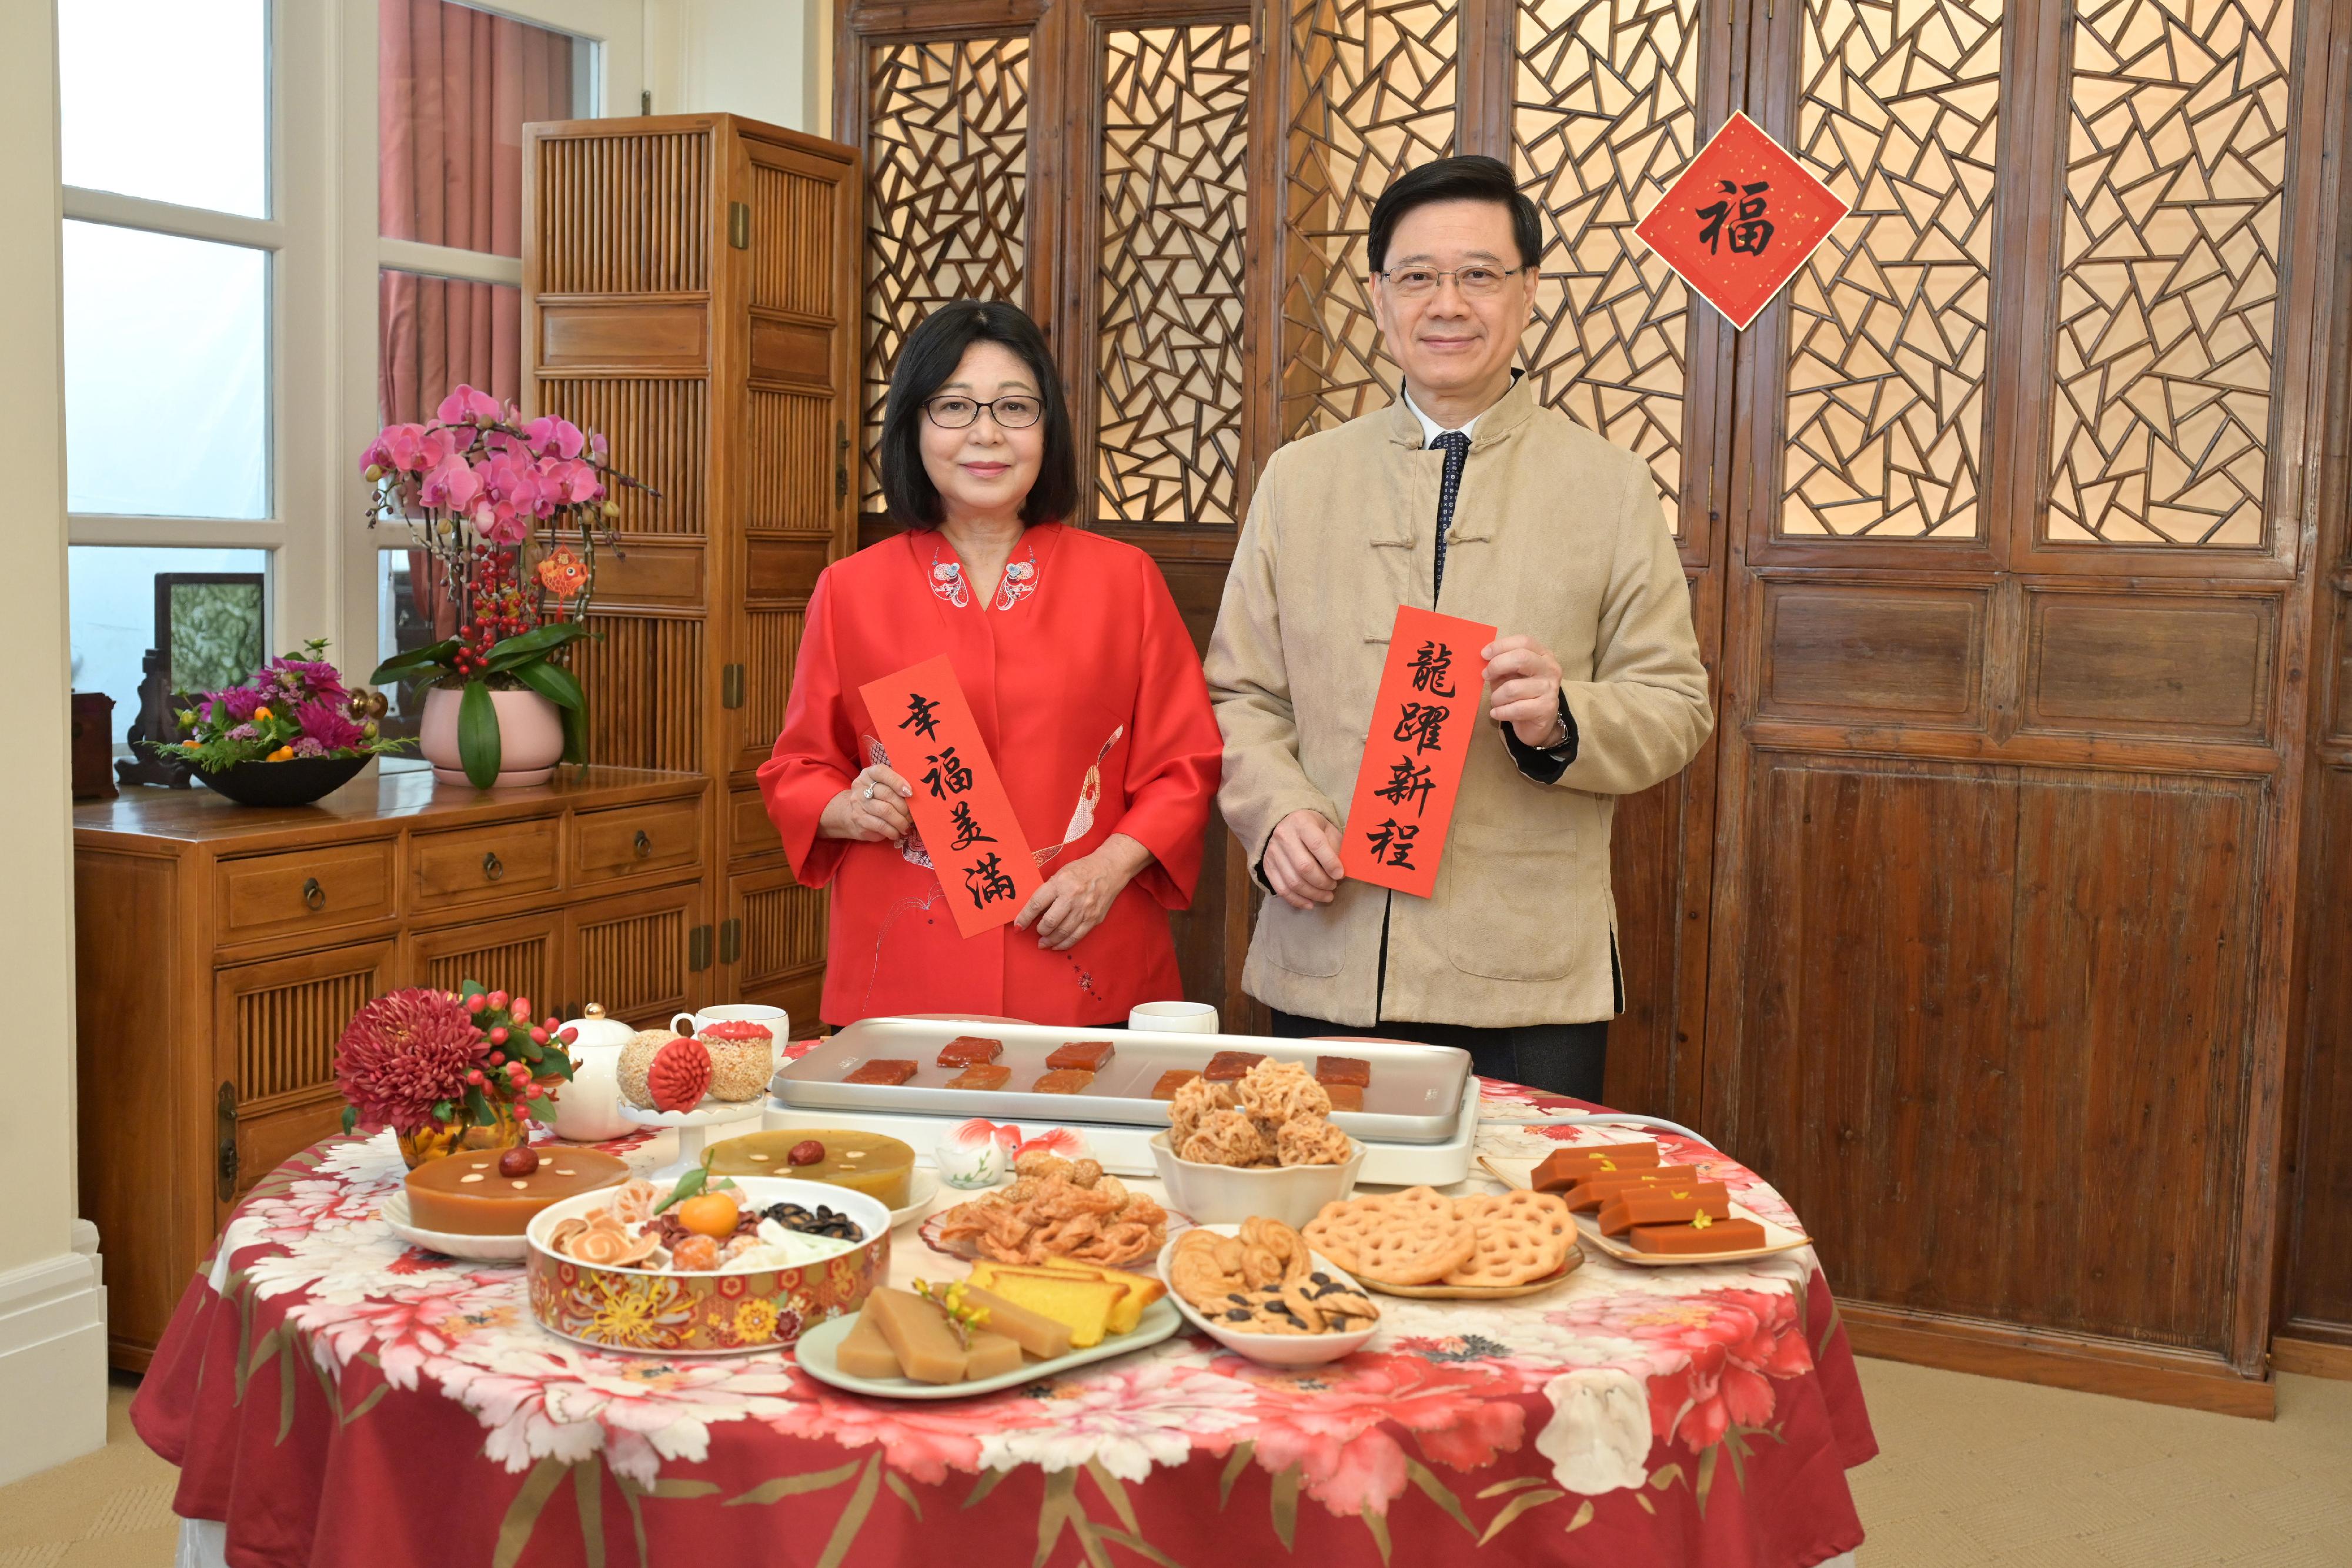 The Chief Executive, Mr John Lee, delivered his Lunar New Year message today (February 9). Mr Lee (right) and Mrs Lee (left) wished the people of Hong Kong a full house of happiness, harmony and good health in the Year of the Dragon.